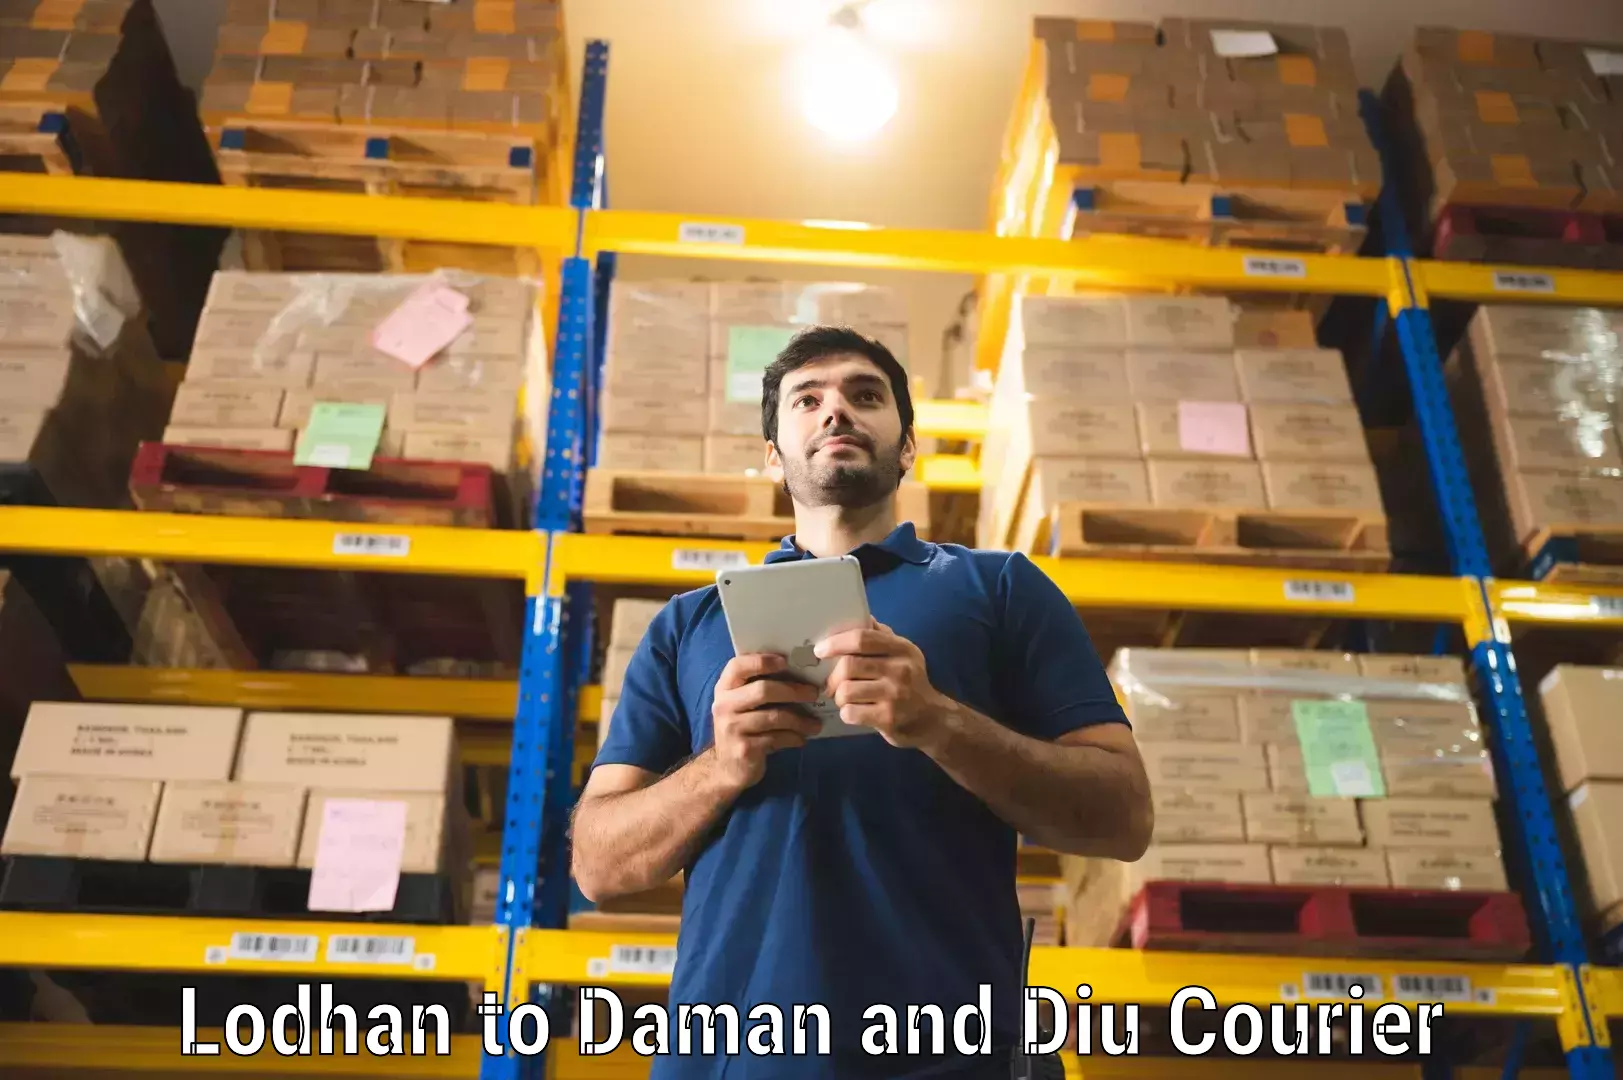 Courier service comparison Lodhan to Daman and Diu